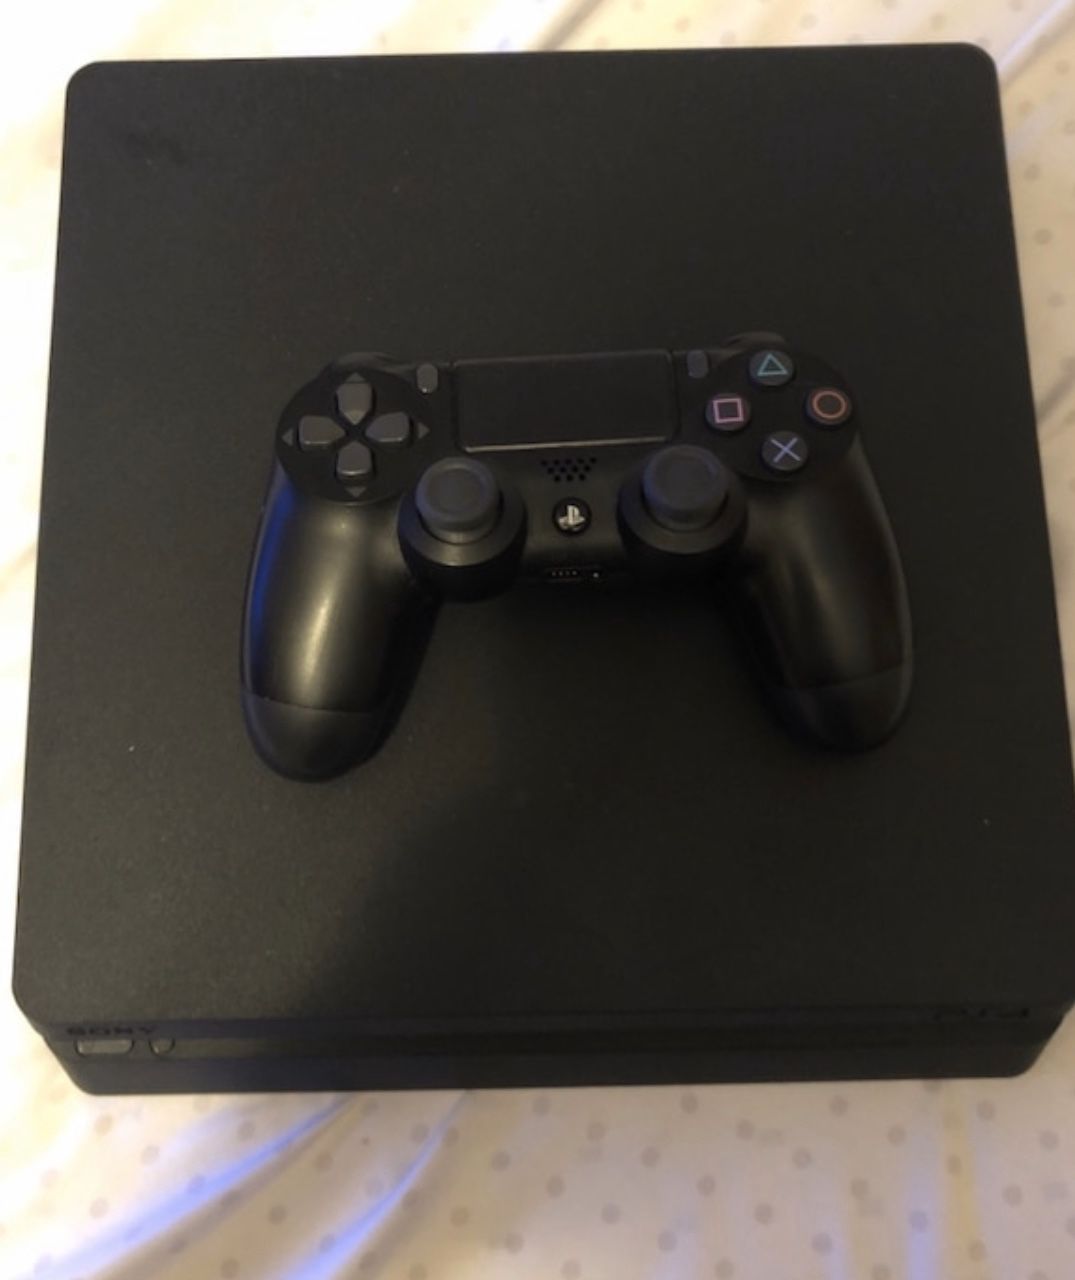 PS4 Slim controller and cables too